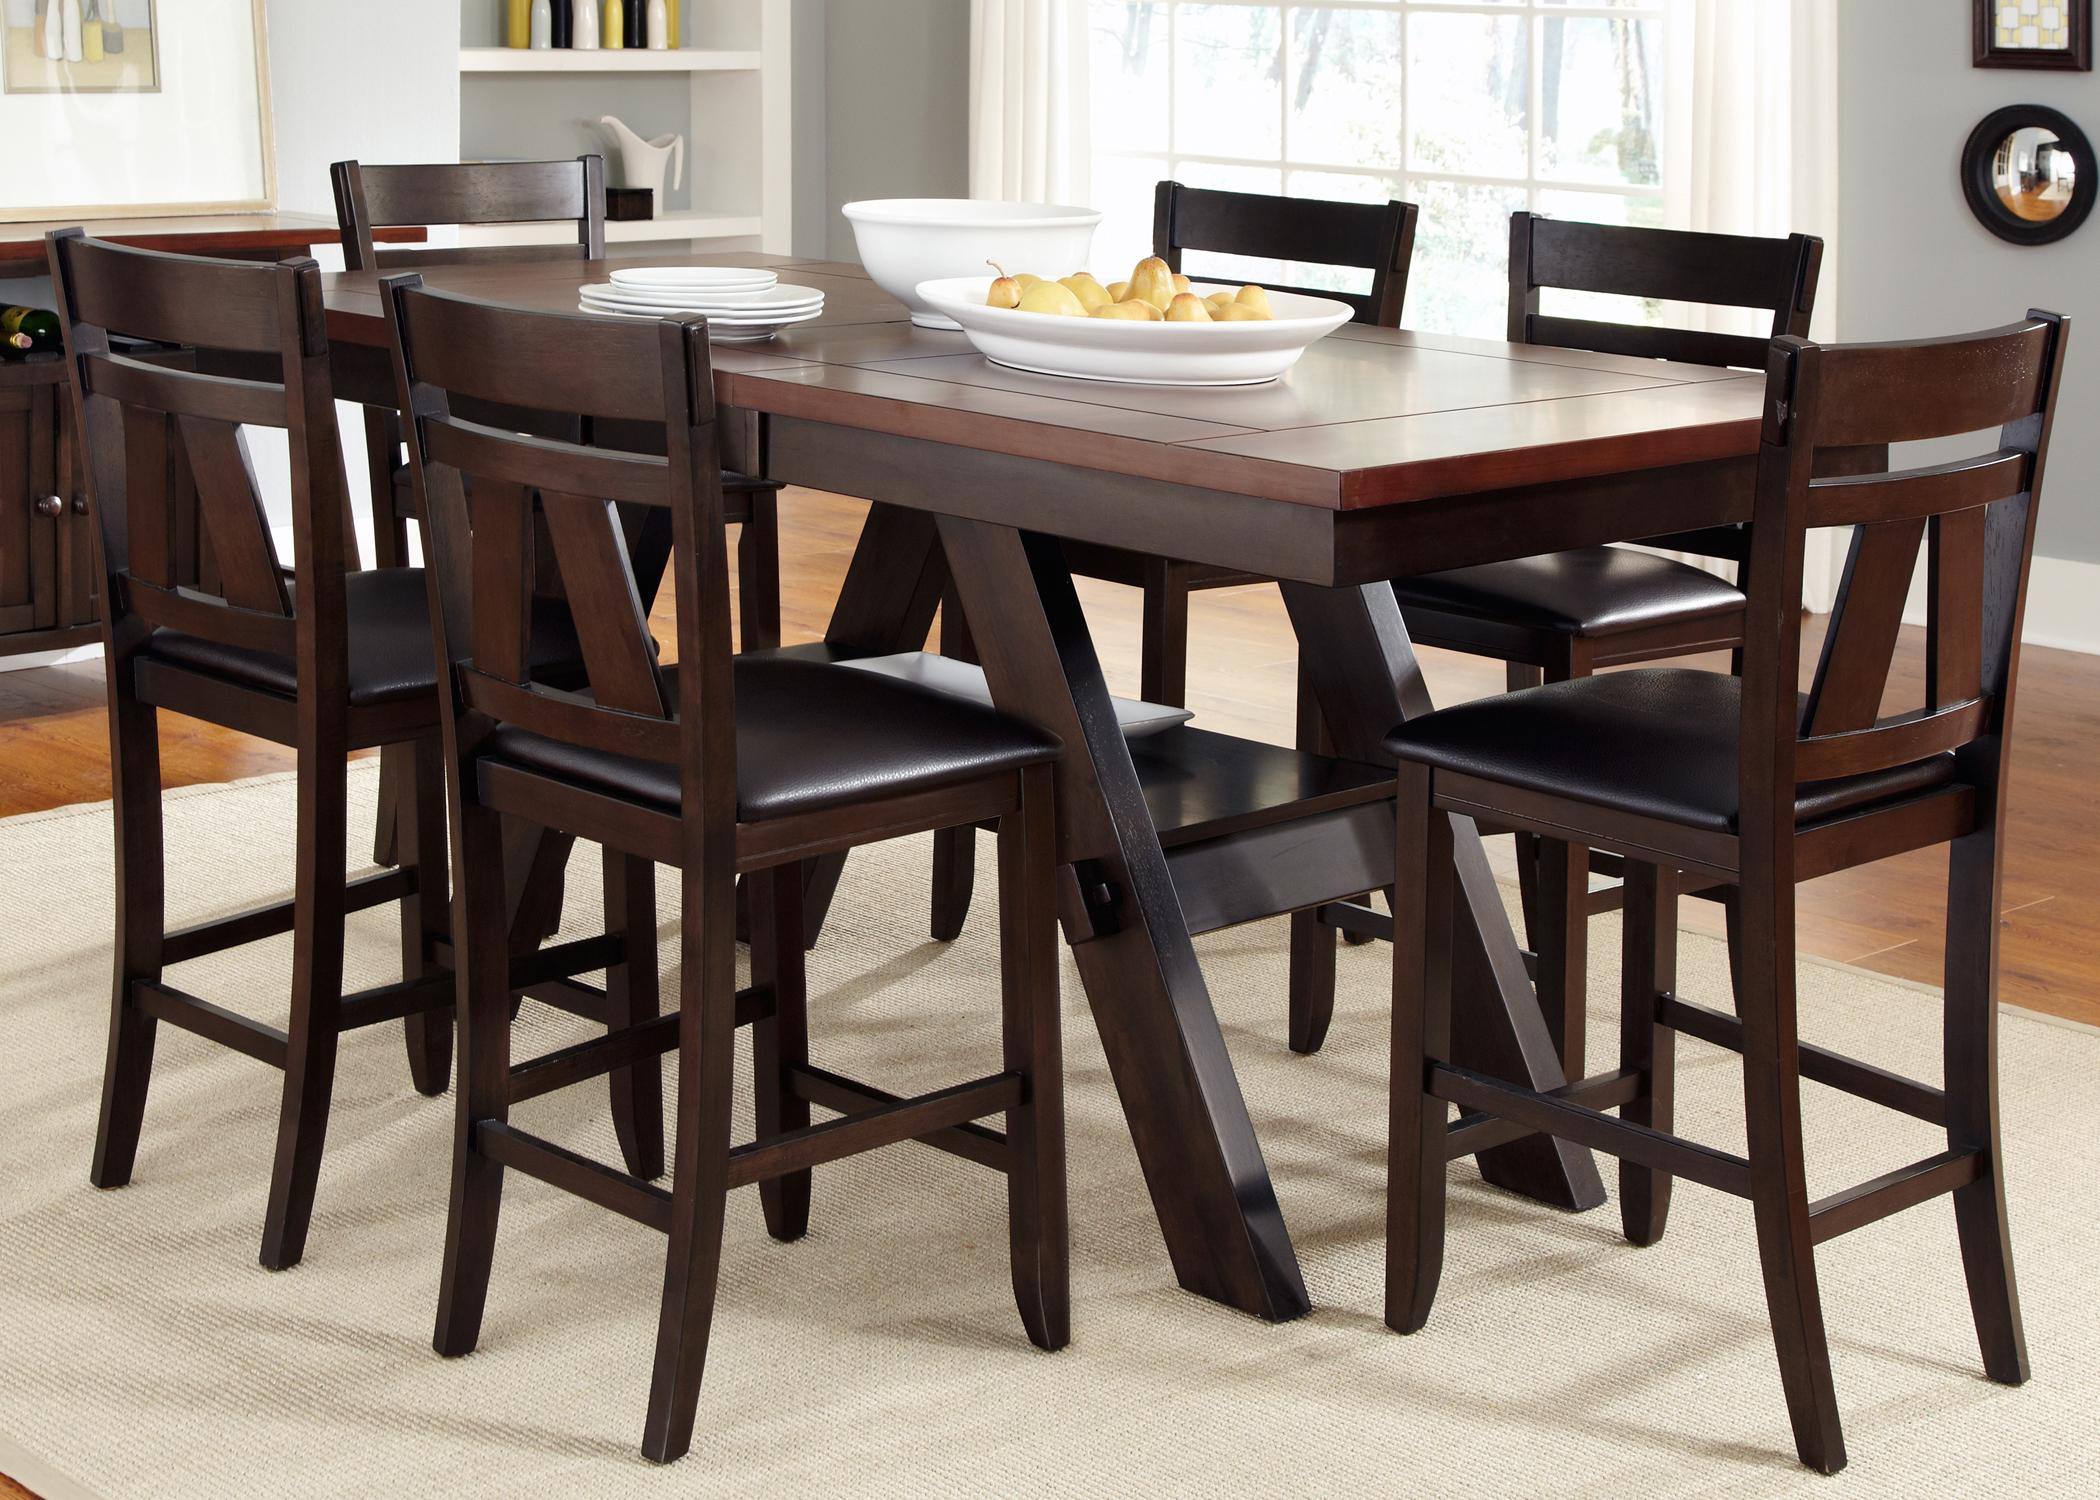 Lawson Gathering Table With Counter Height Chairs pertaining to measurements 2100 X 1500